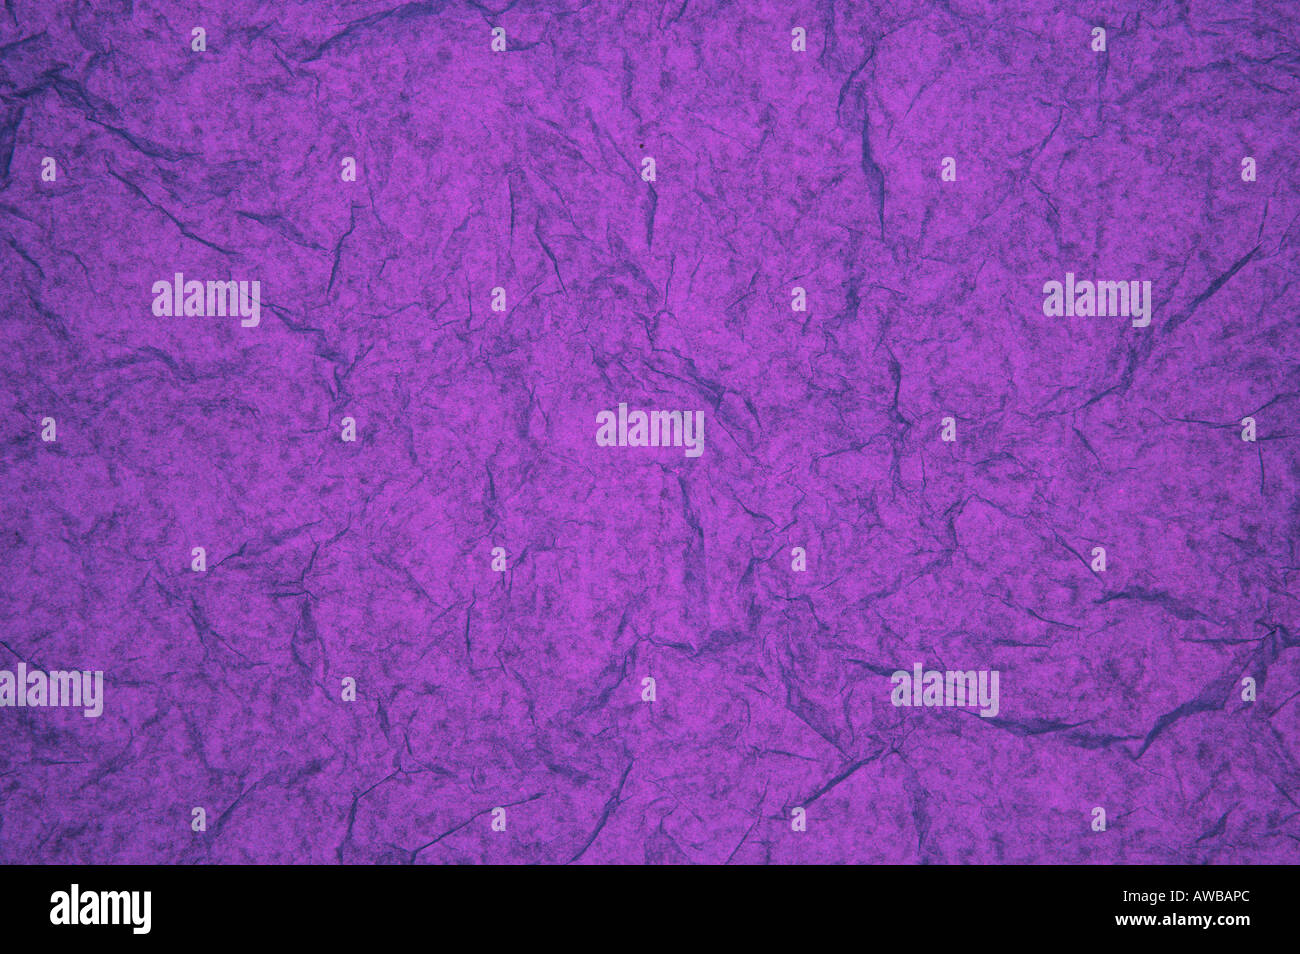 ABSTRACT RANDOM BACKGROUND OF CREASED CRUMPLED PURPLE TISSUE PAPER Stock Photo